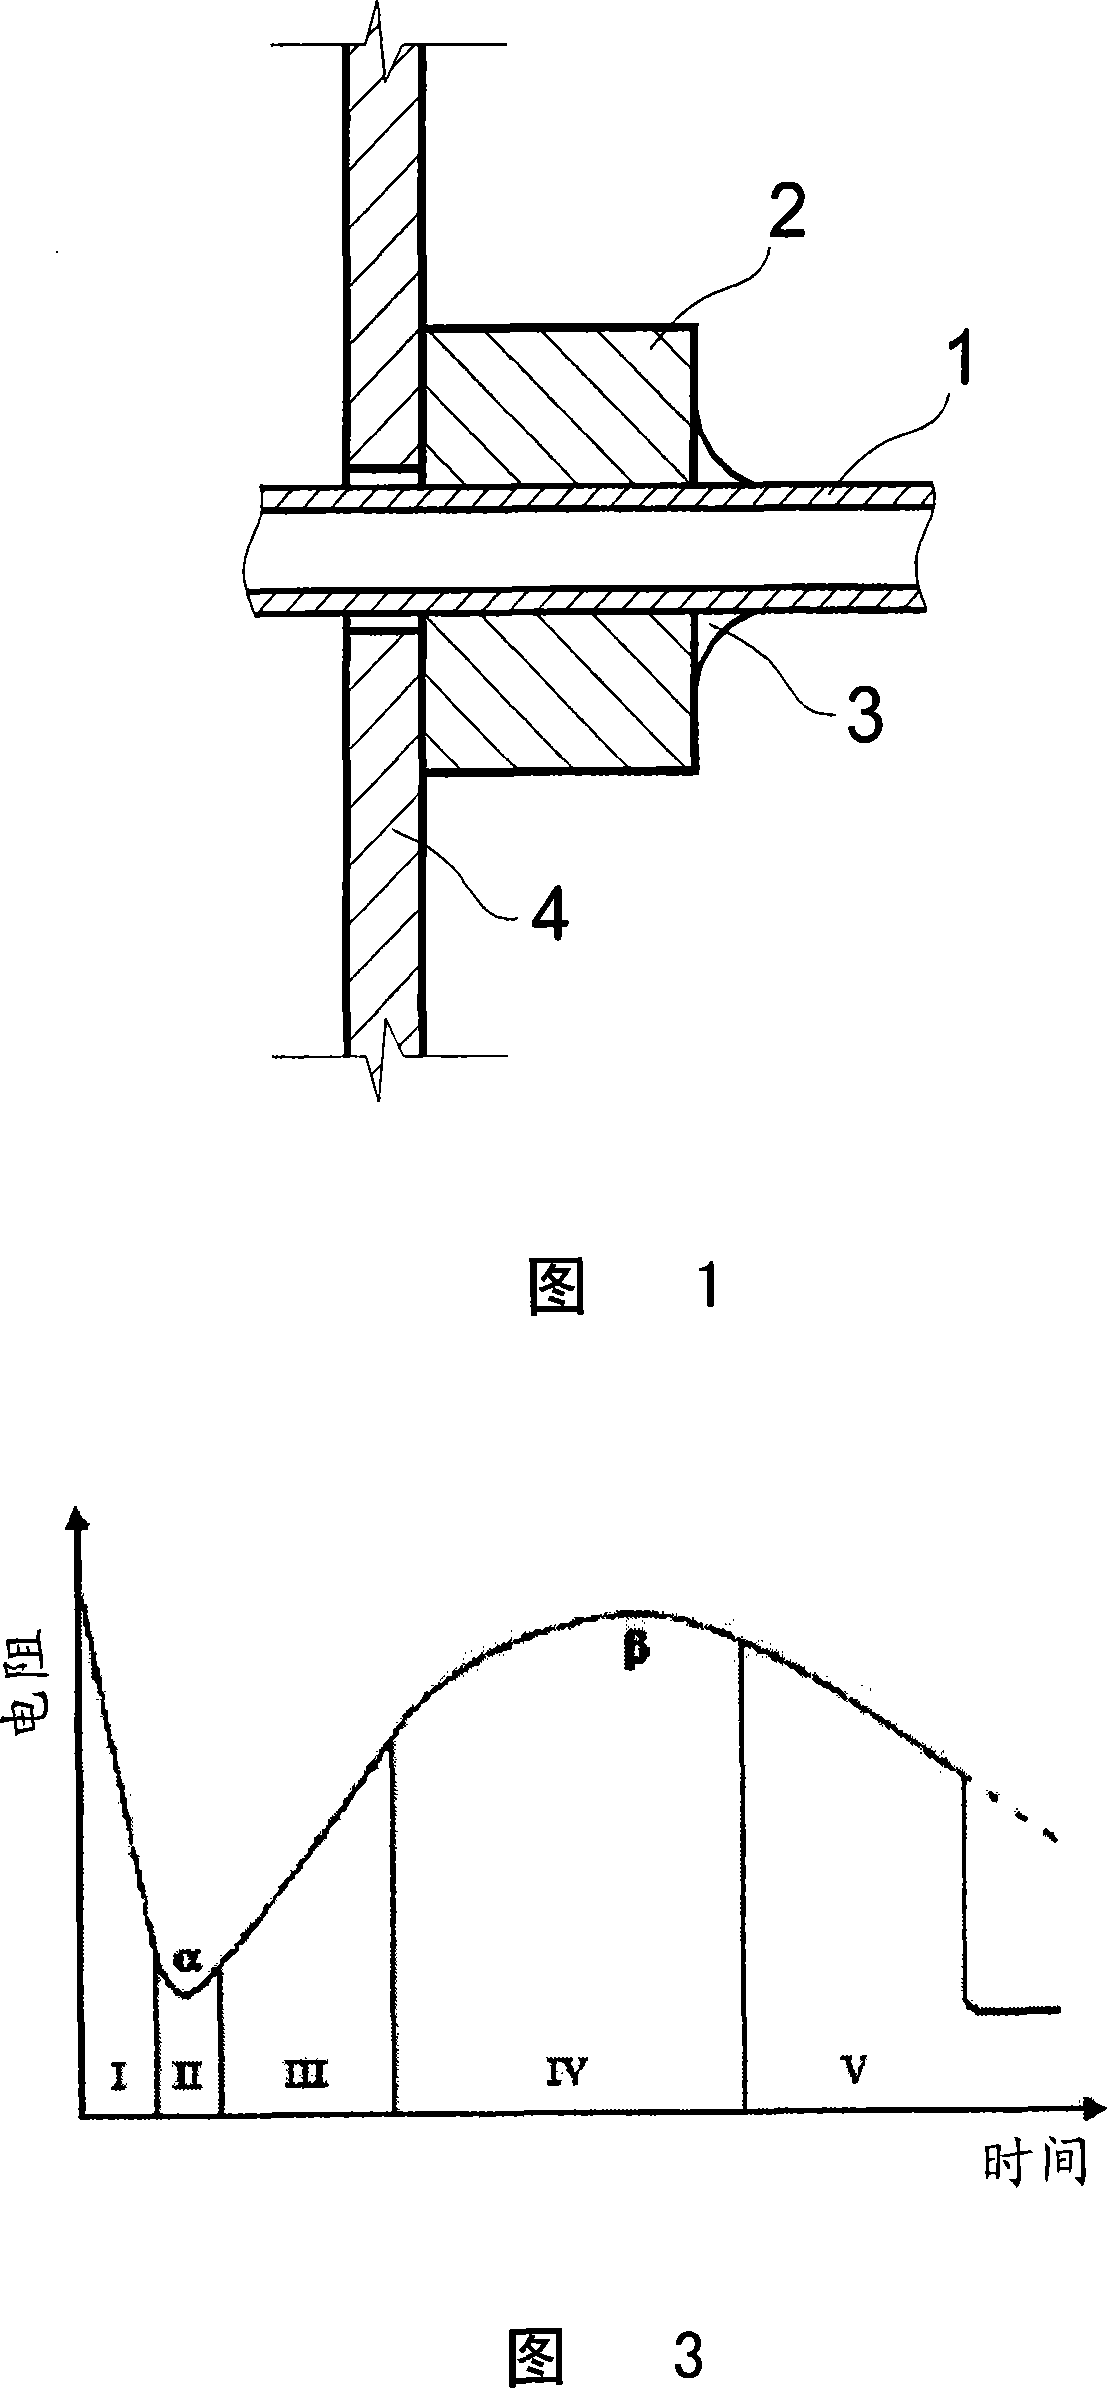 A compressor and method for welding a fluid tubing to a compressor housing and fluid-transporting tubing